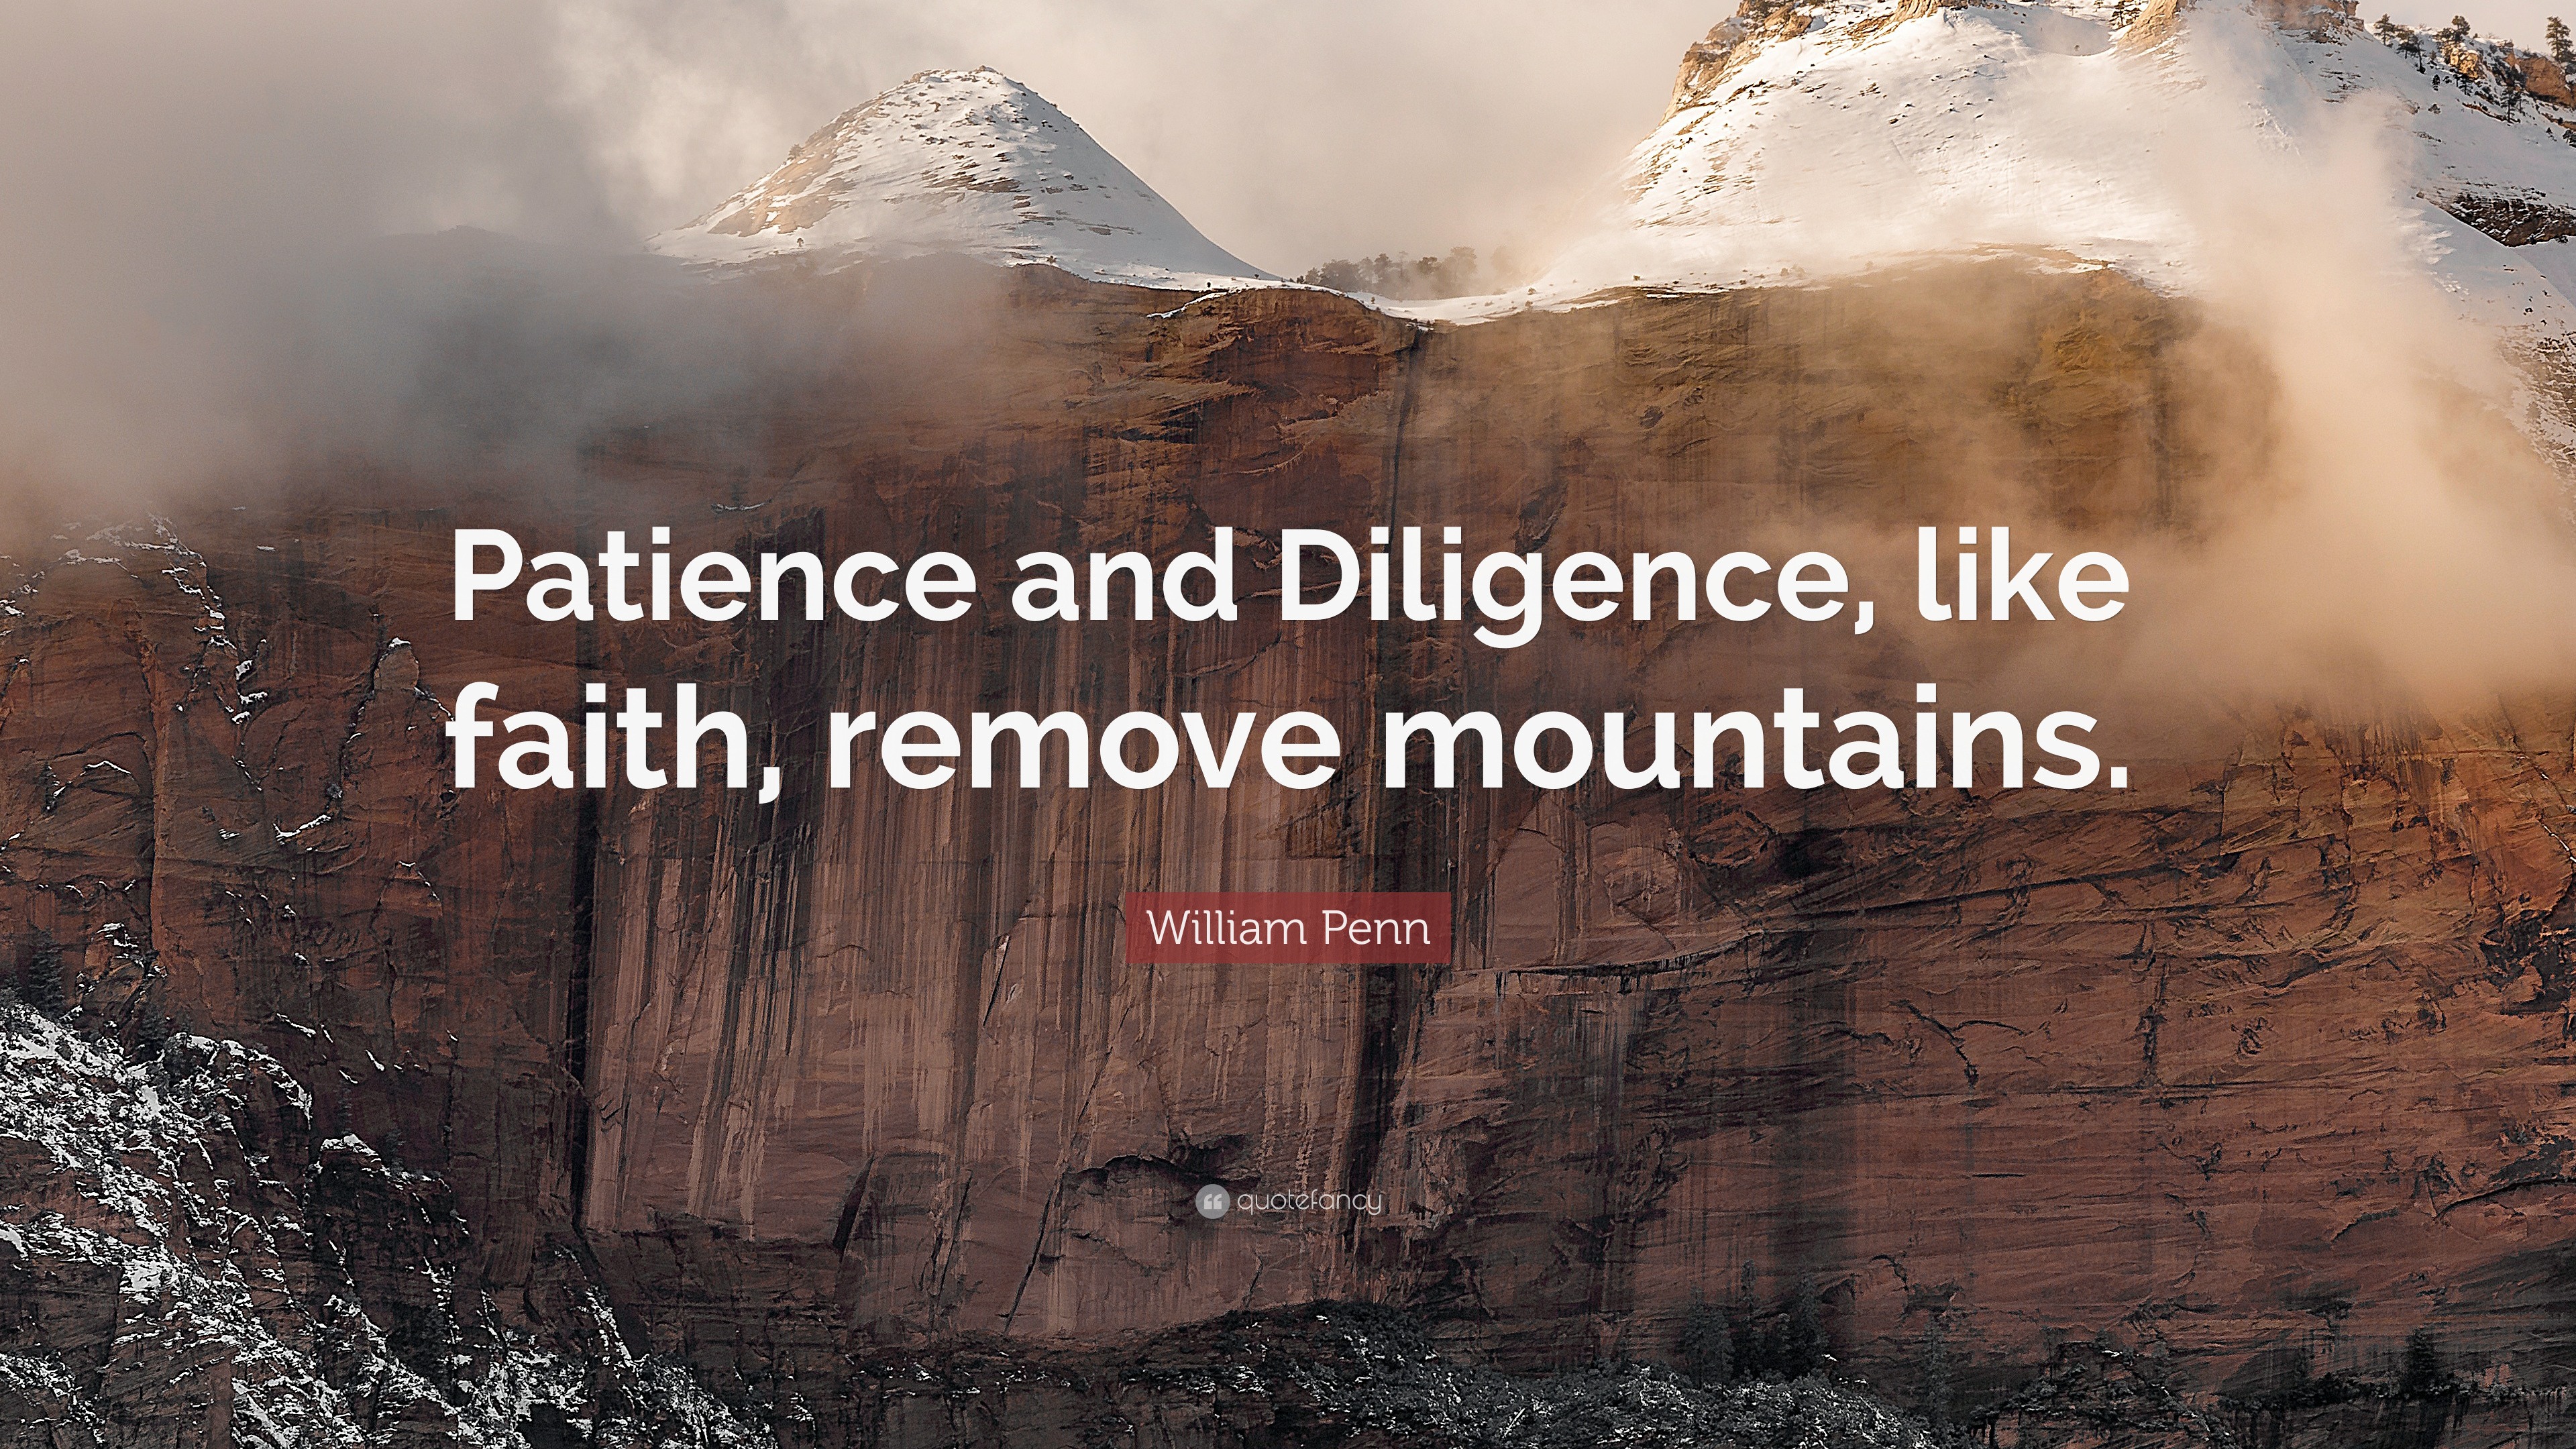 William Penn Quote: “Patience and Diligence, like faith, remove mountains.”